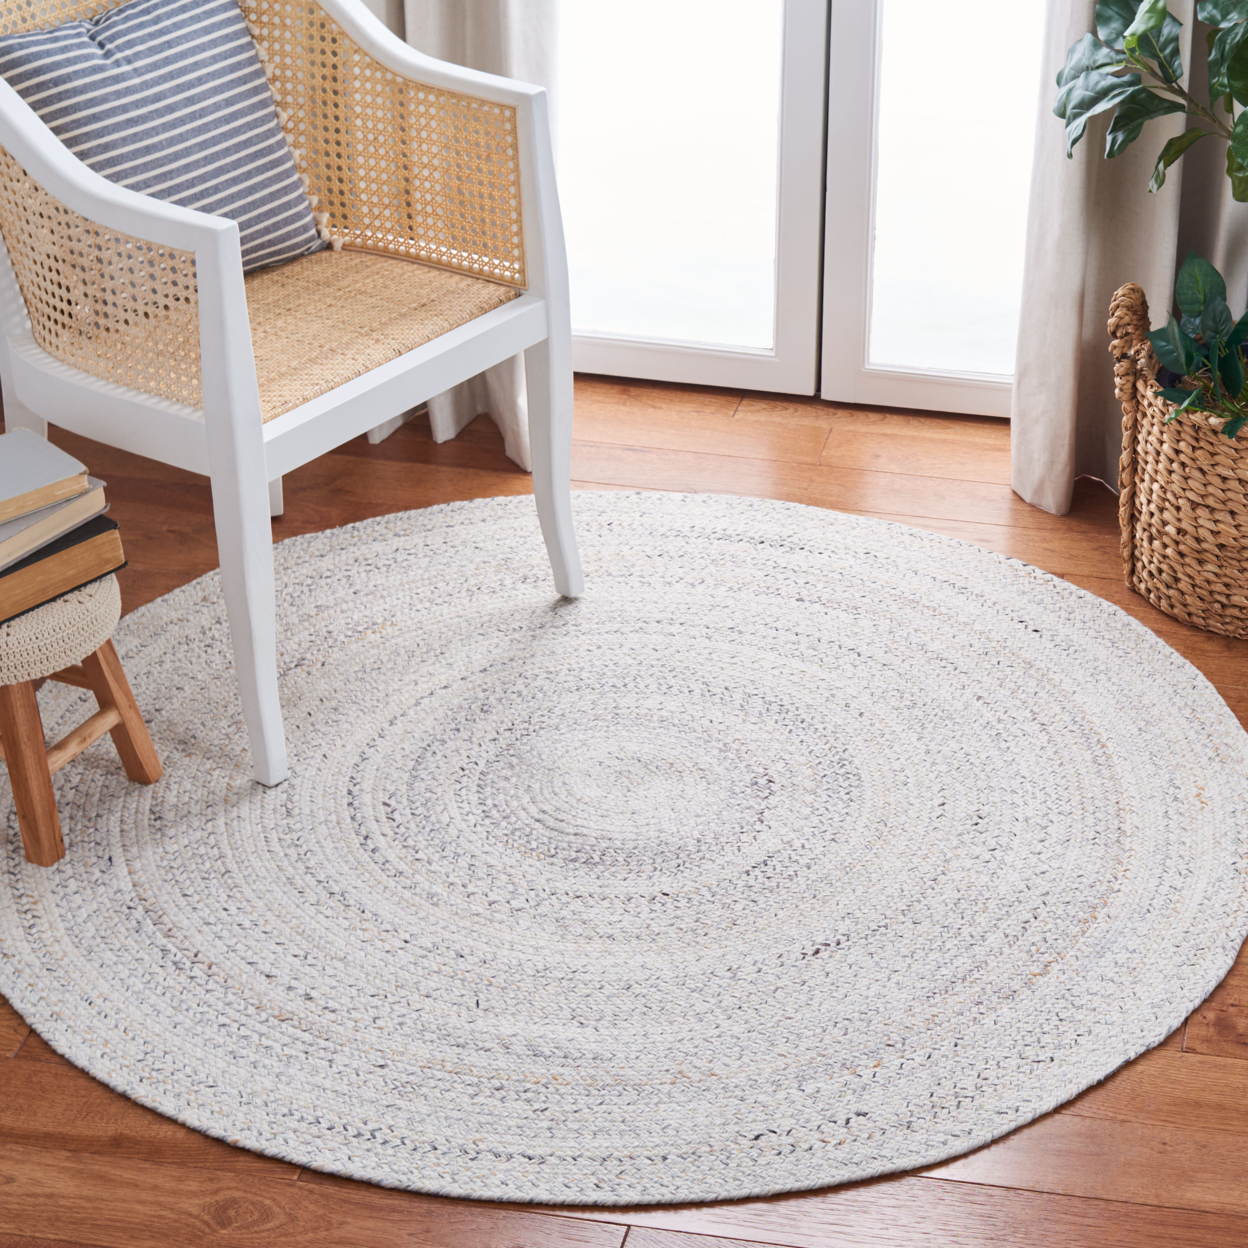 SAFAVIEH Braided Collection BRD851A Handwoven Ivory Rug - 6' Round